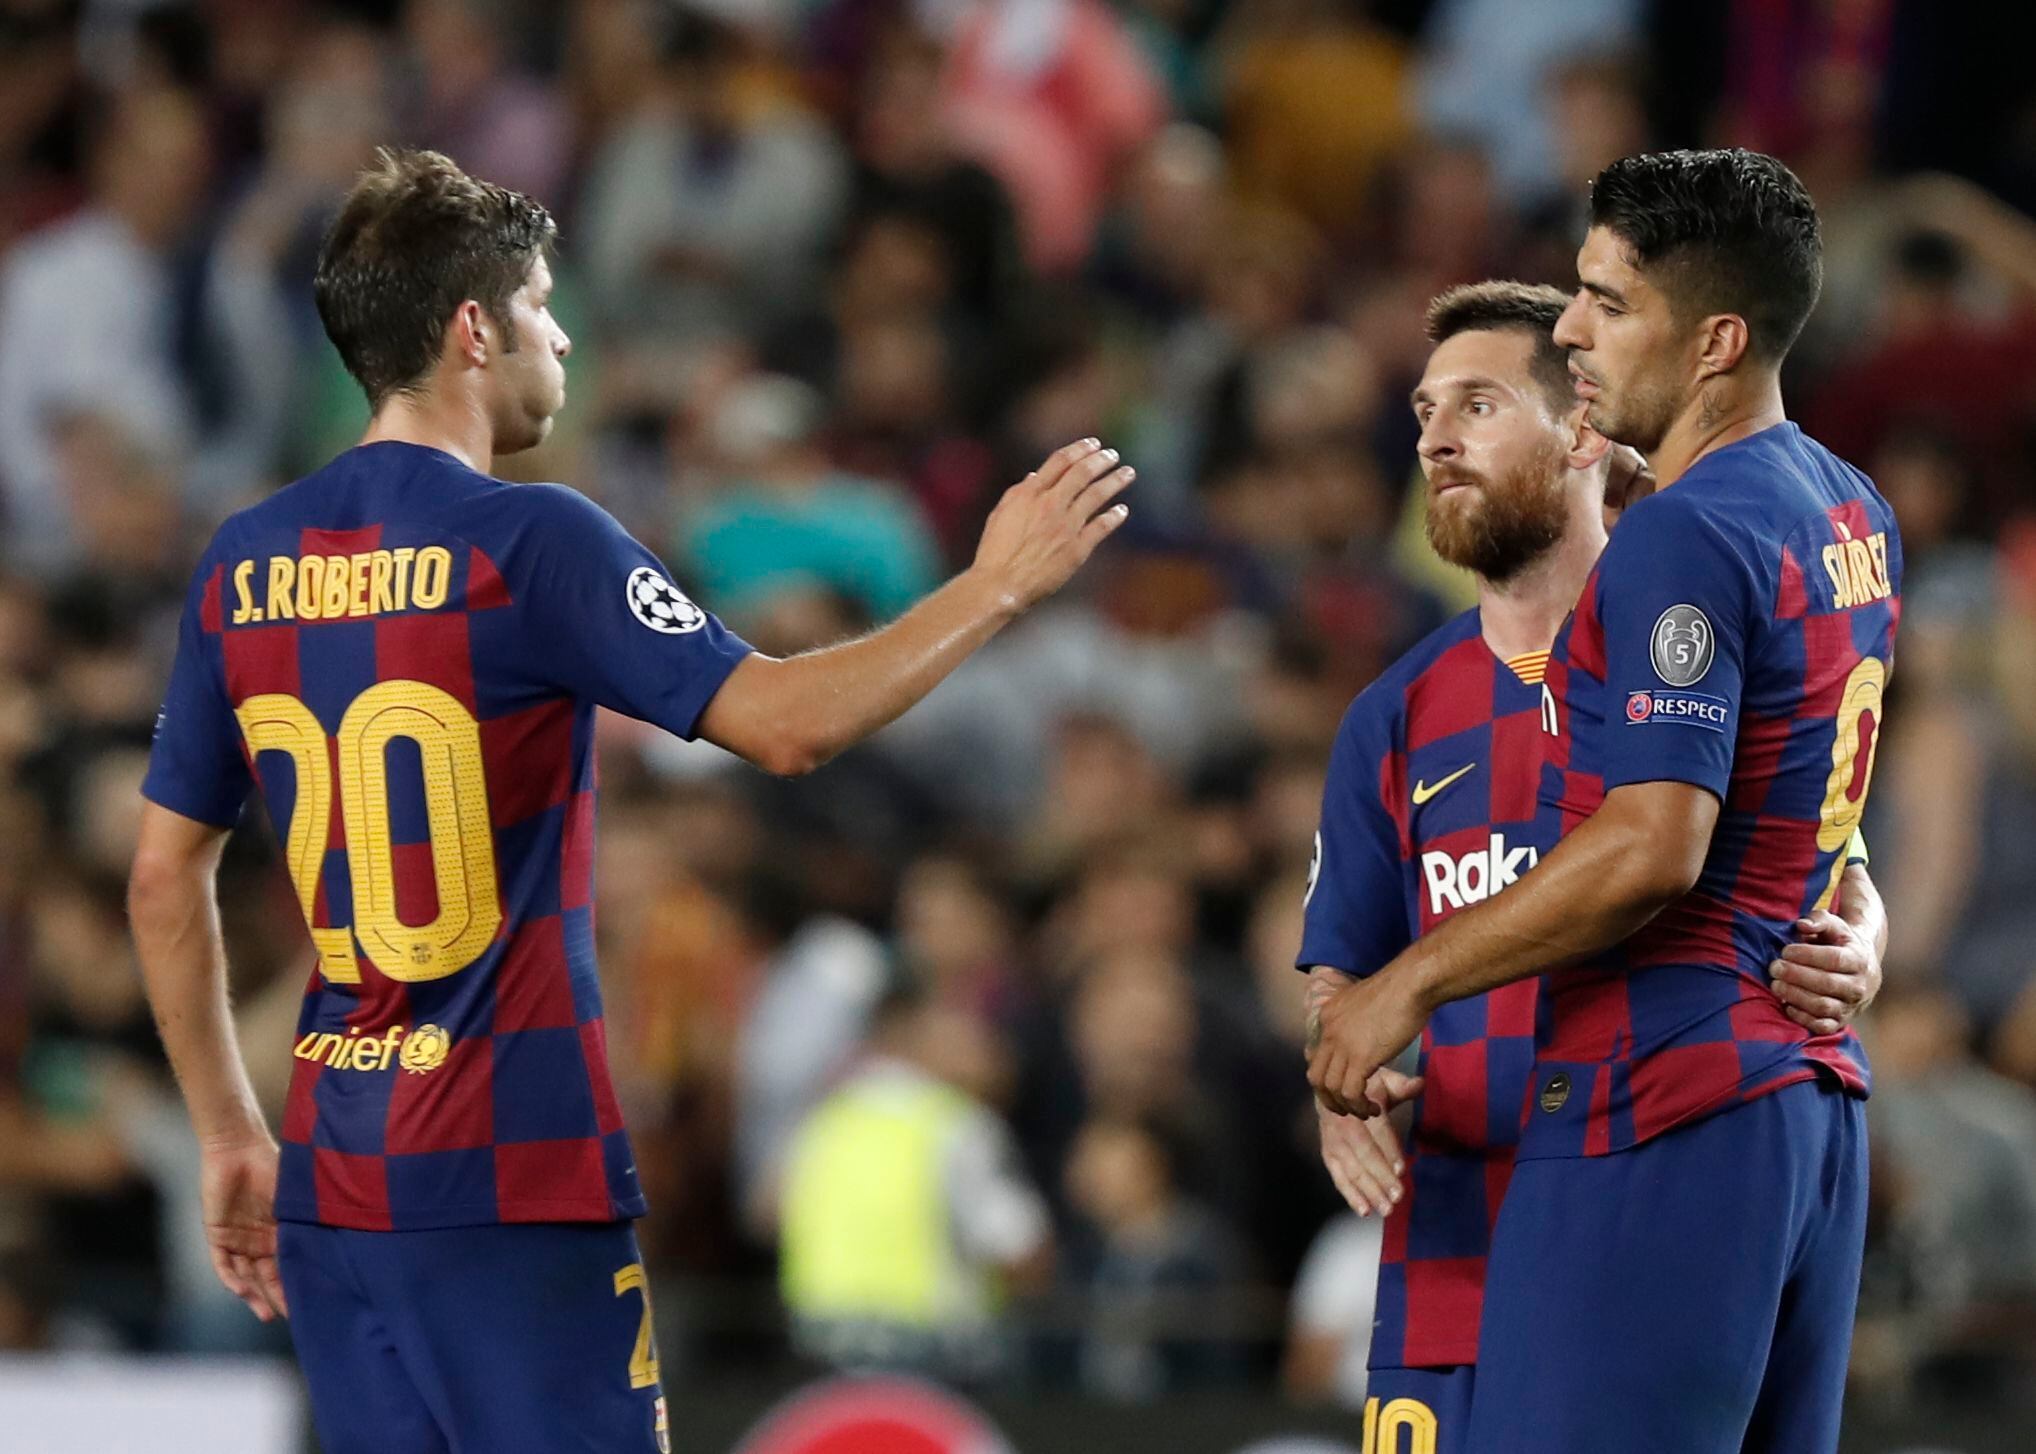 Barcelona's Luis Suarez, Lionel Messi, and Sergi Roberto celebrate at the end of group F Champions League soccer match between F.C. Barcelona and Inter Milan at the Camp Nou stadium in Barcelona, Spain, Wednesday, Oct. 2, 2019. (AP Photo/Joan Monfort)